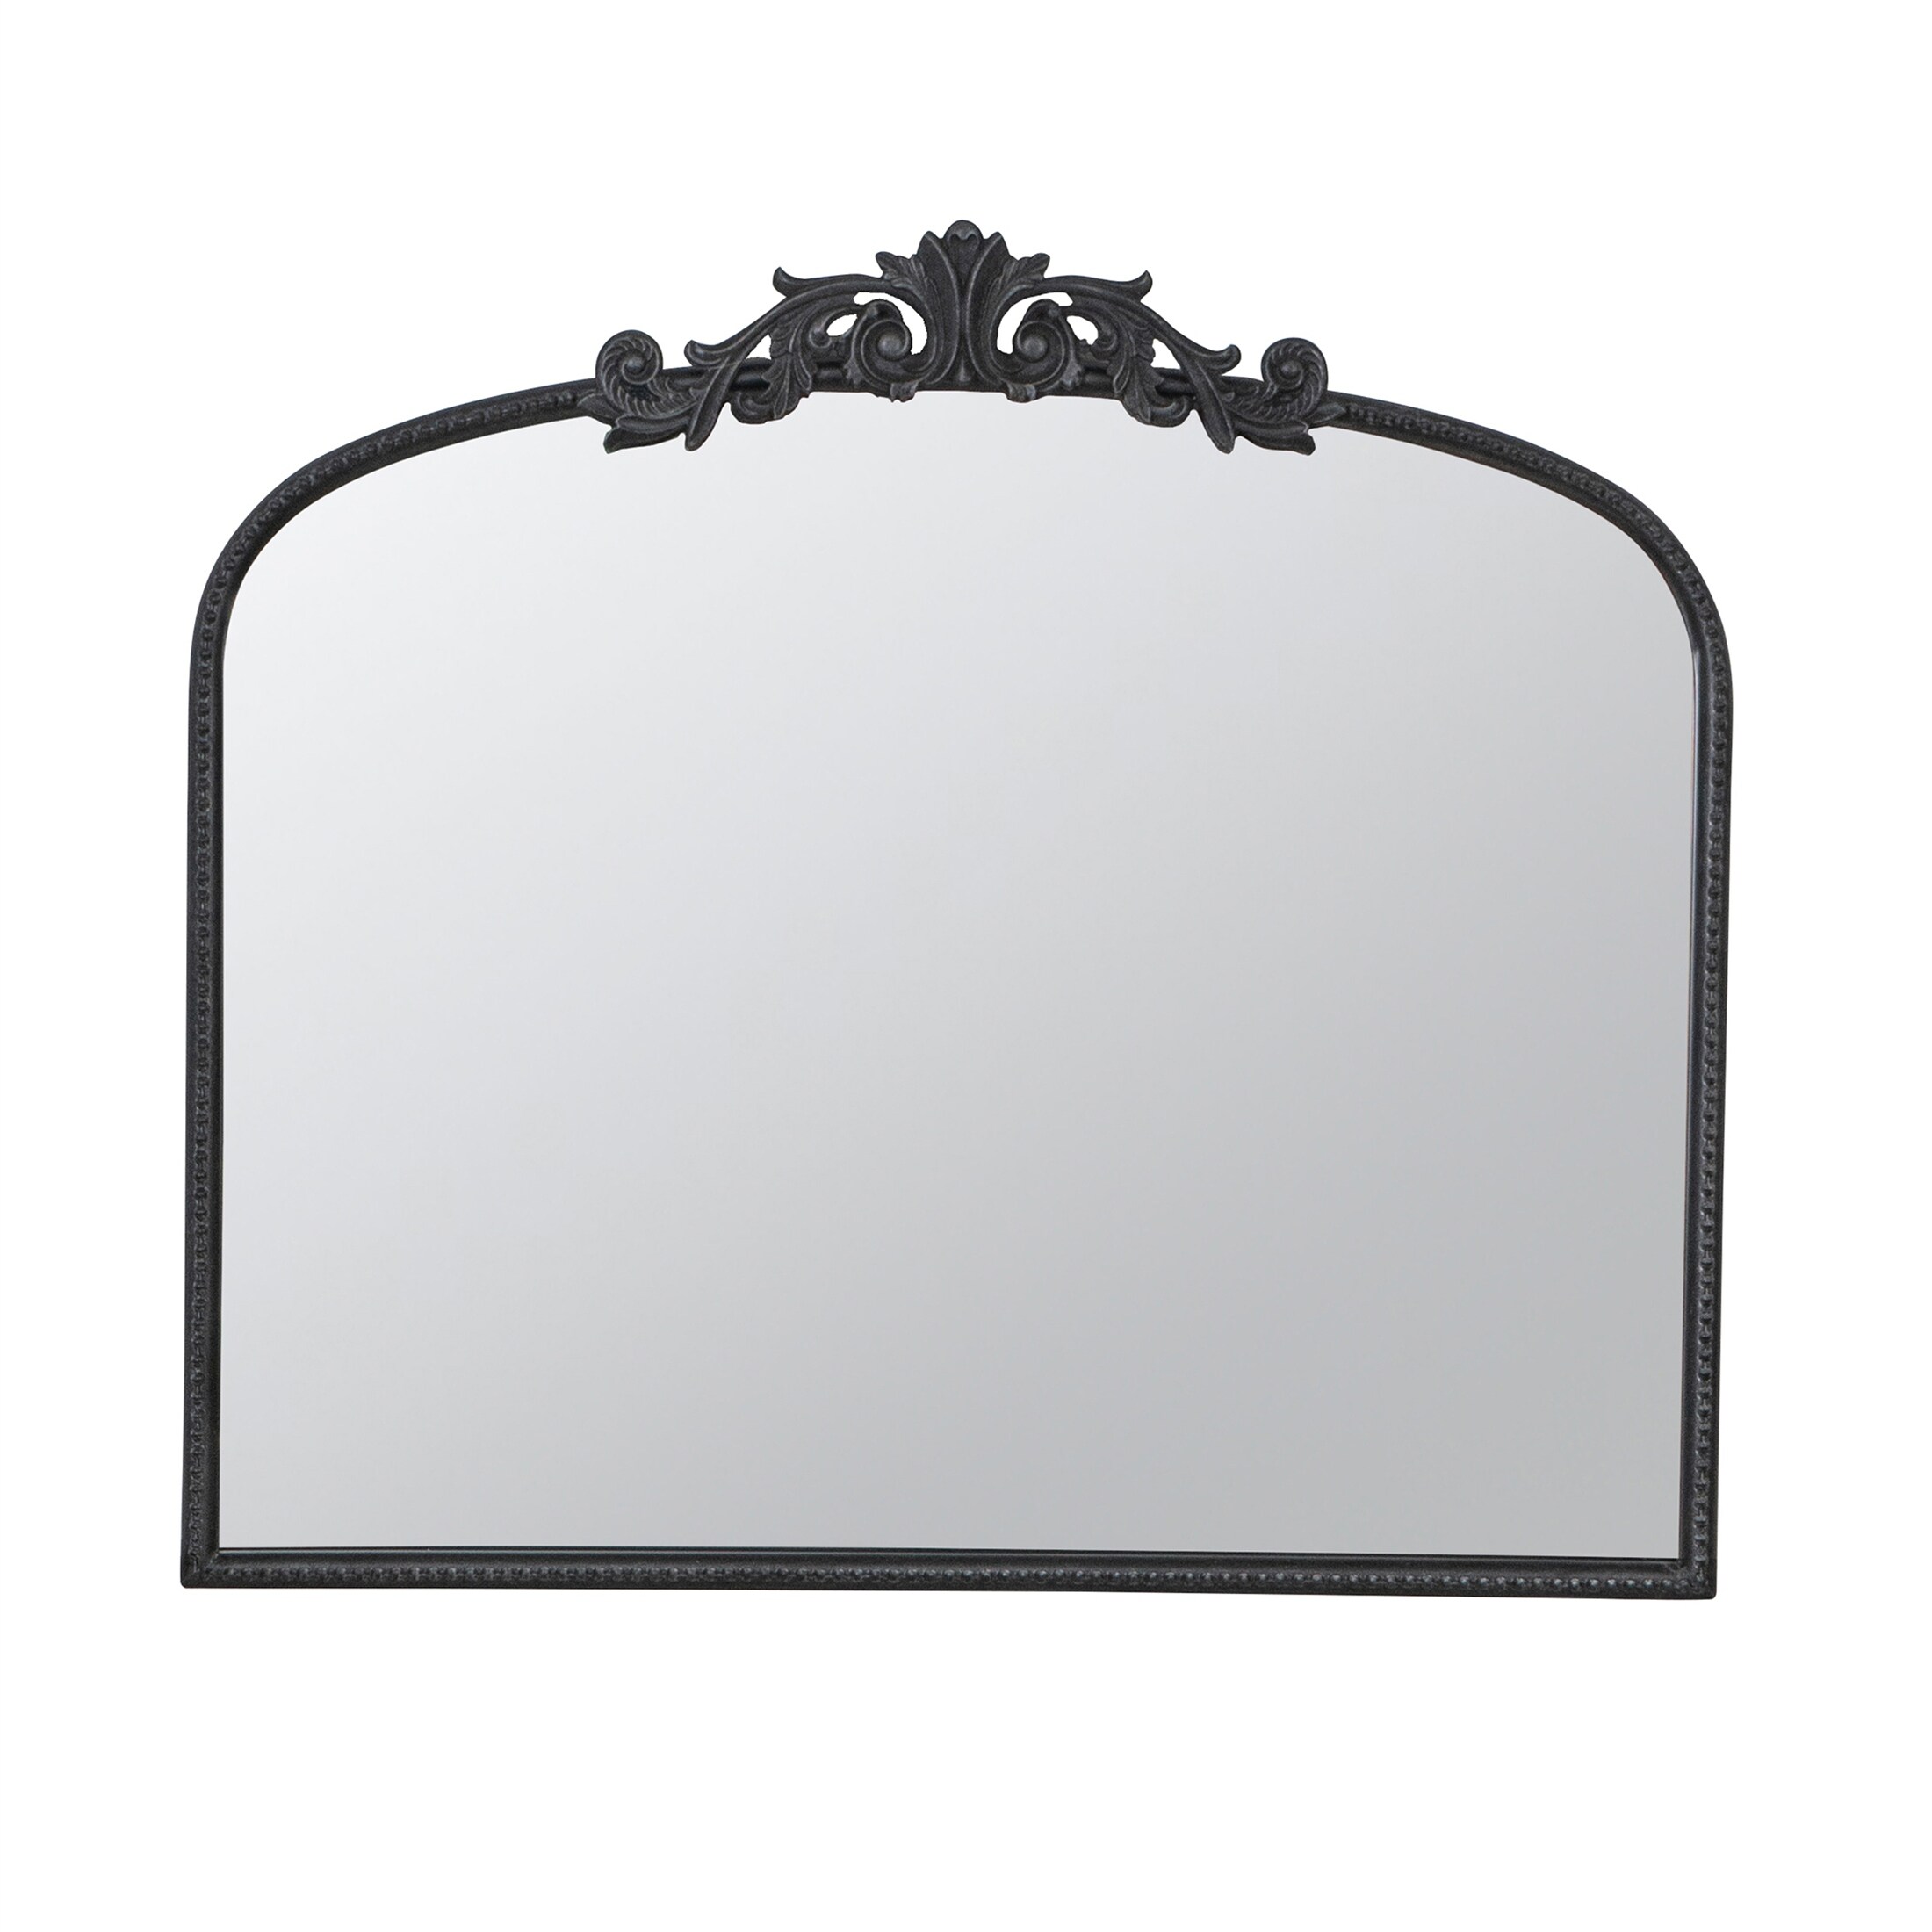 Arch Mirror and Baroque Inspired Frame